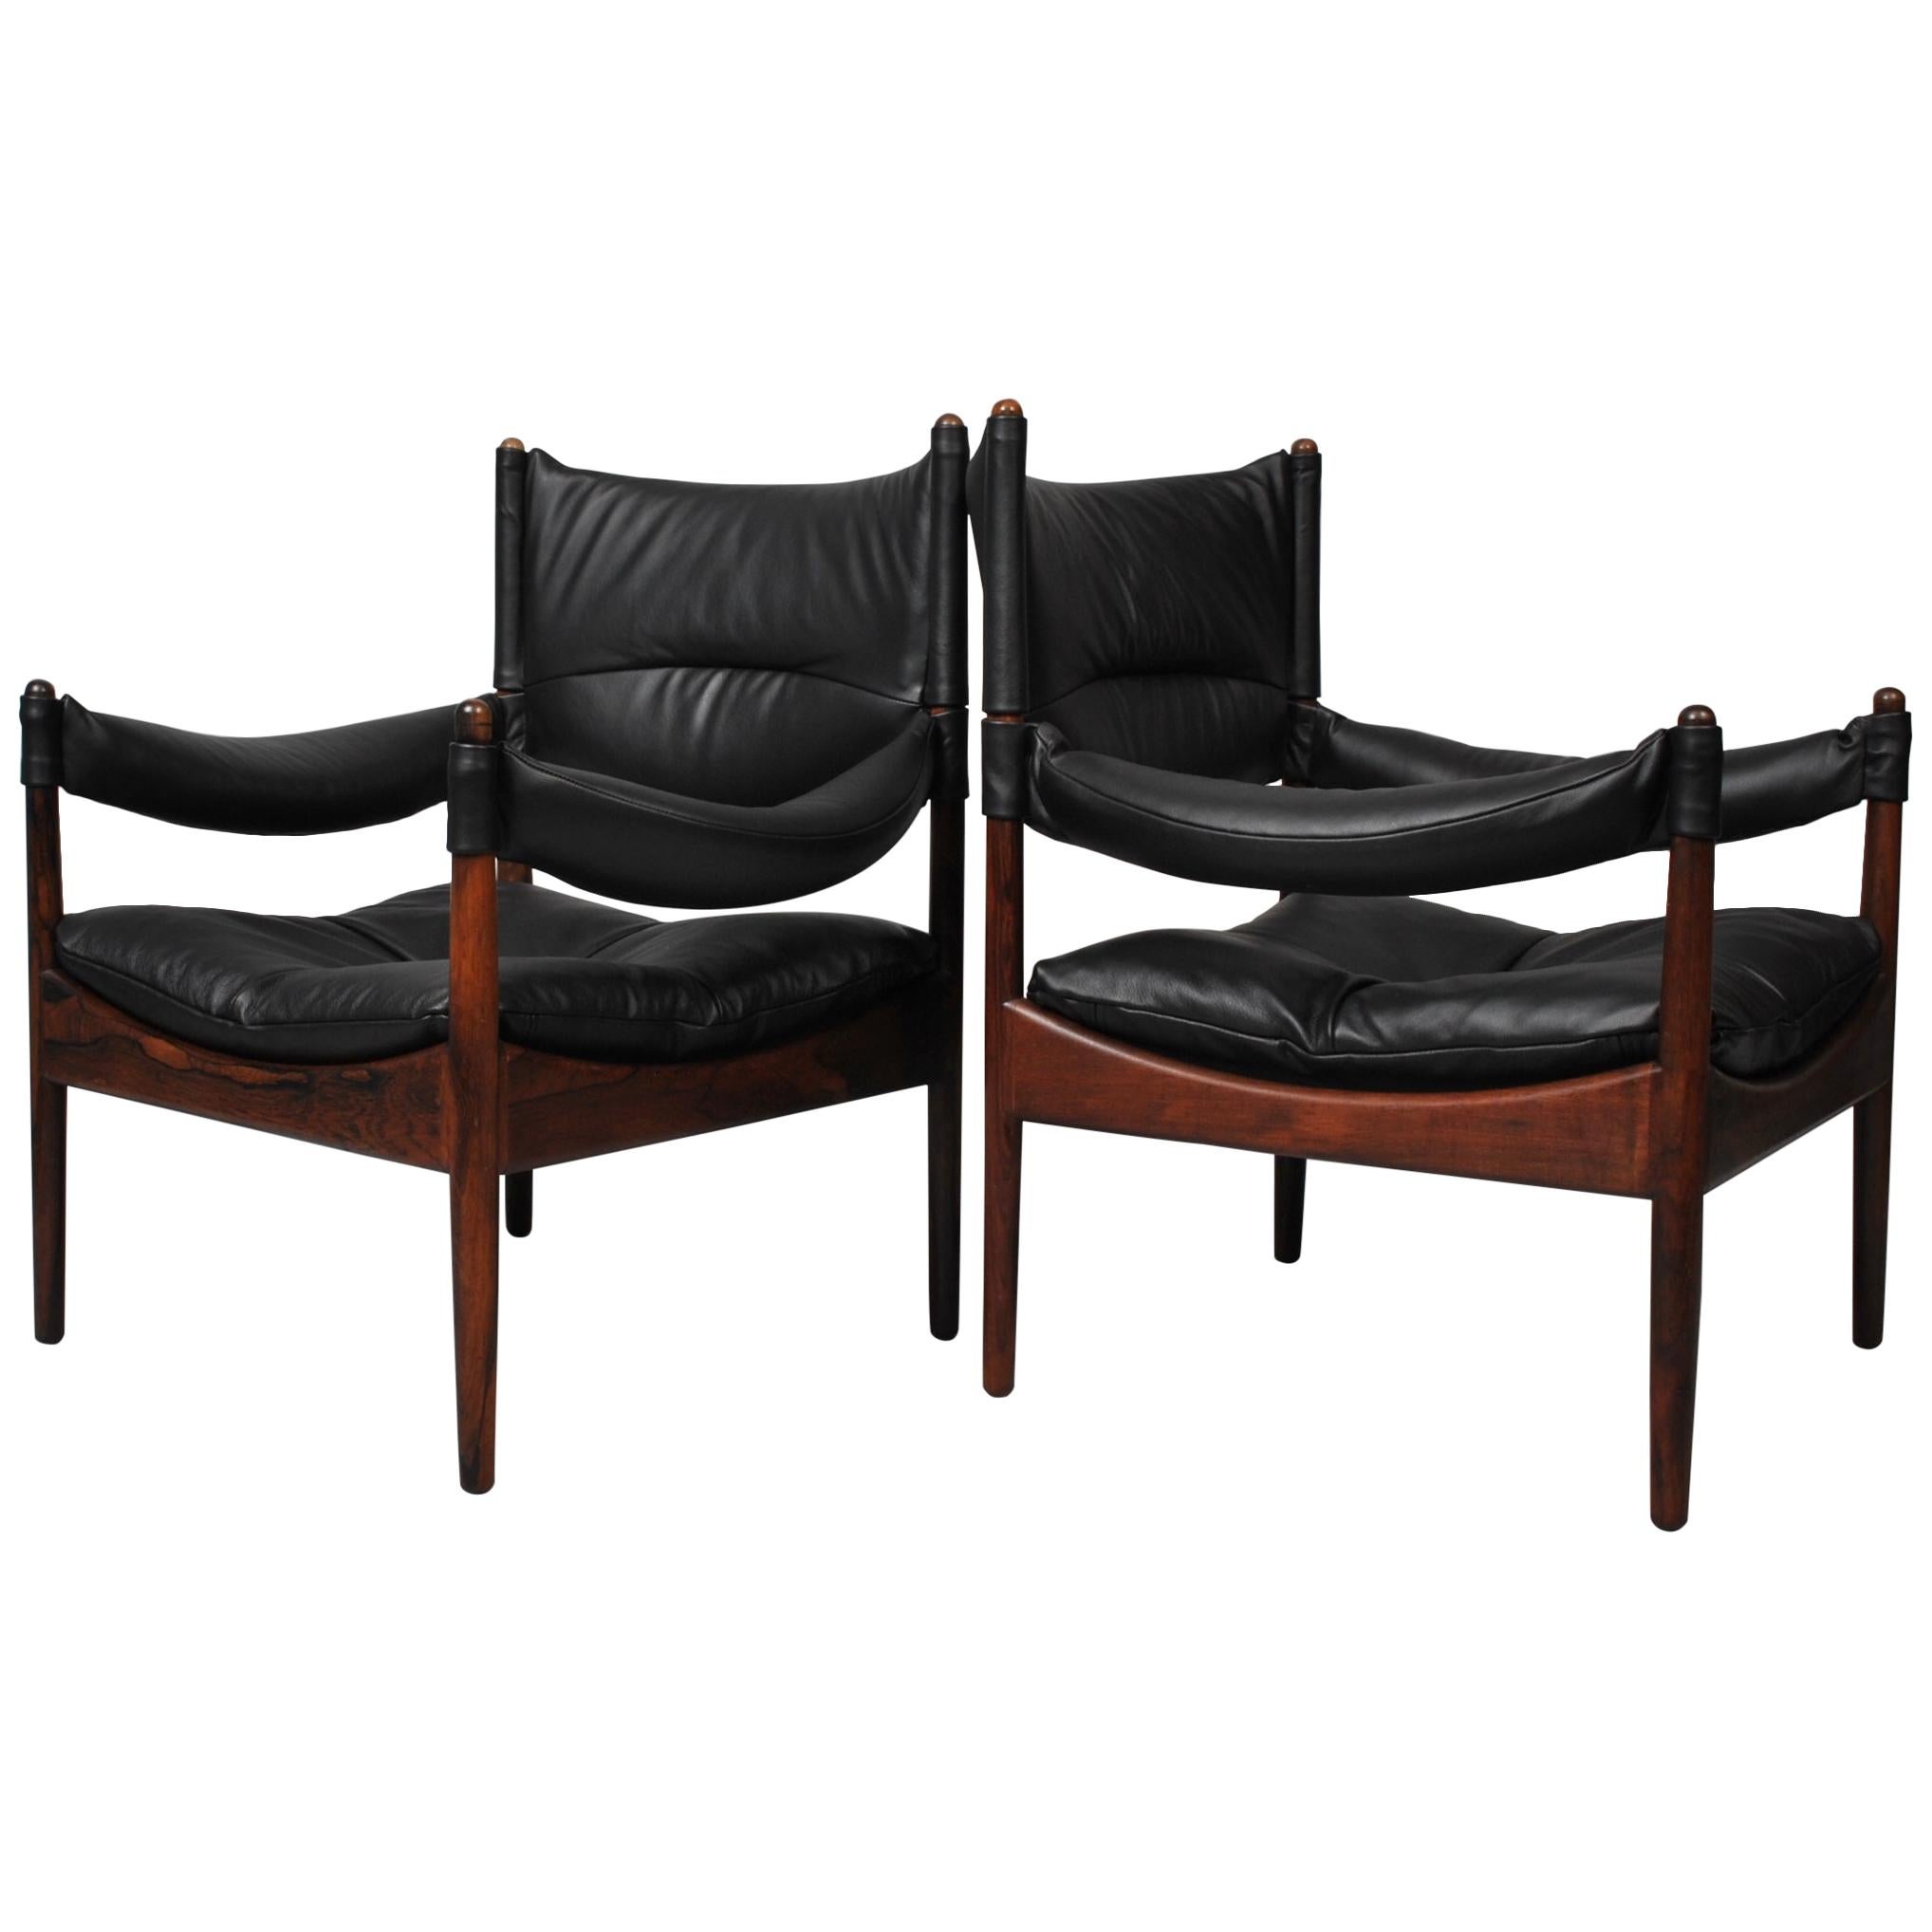 Pair of Rosewood Lounge Chairs by Kristian Vedel, Fully Reupholstered